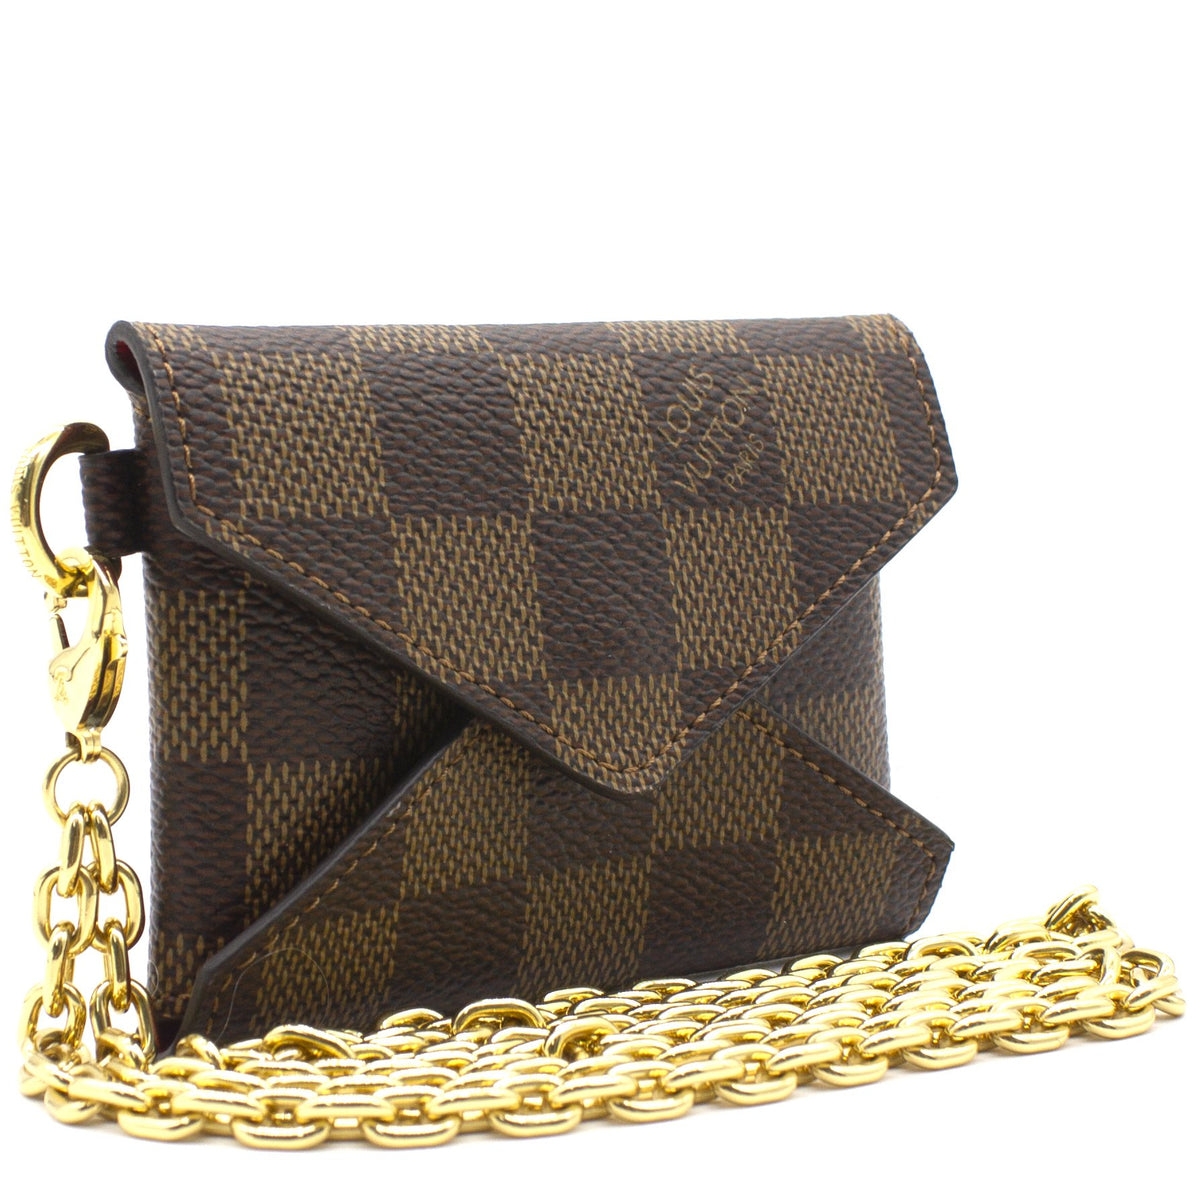 Shop Louis Vuitton DAMIER Kirigami necklace (N60285) by SkyNS